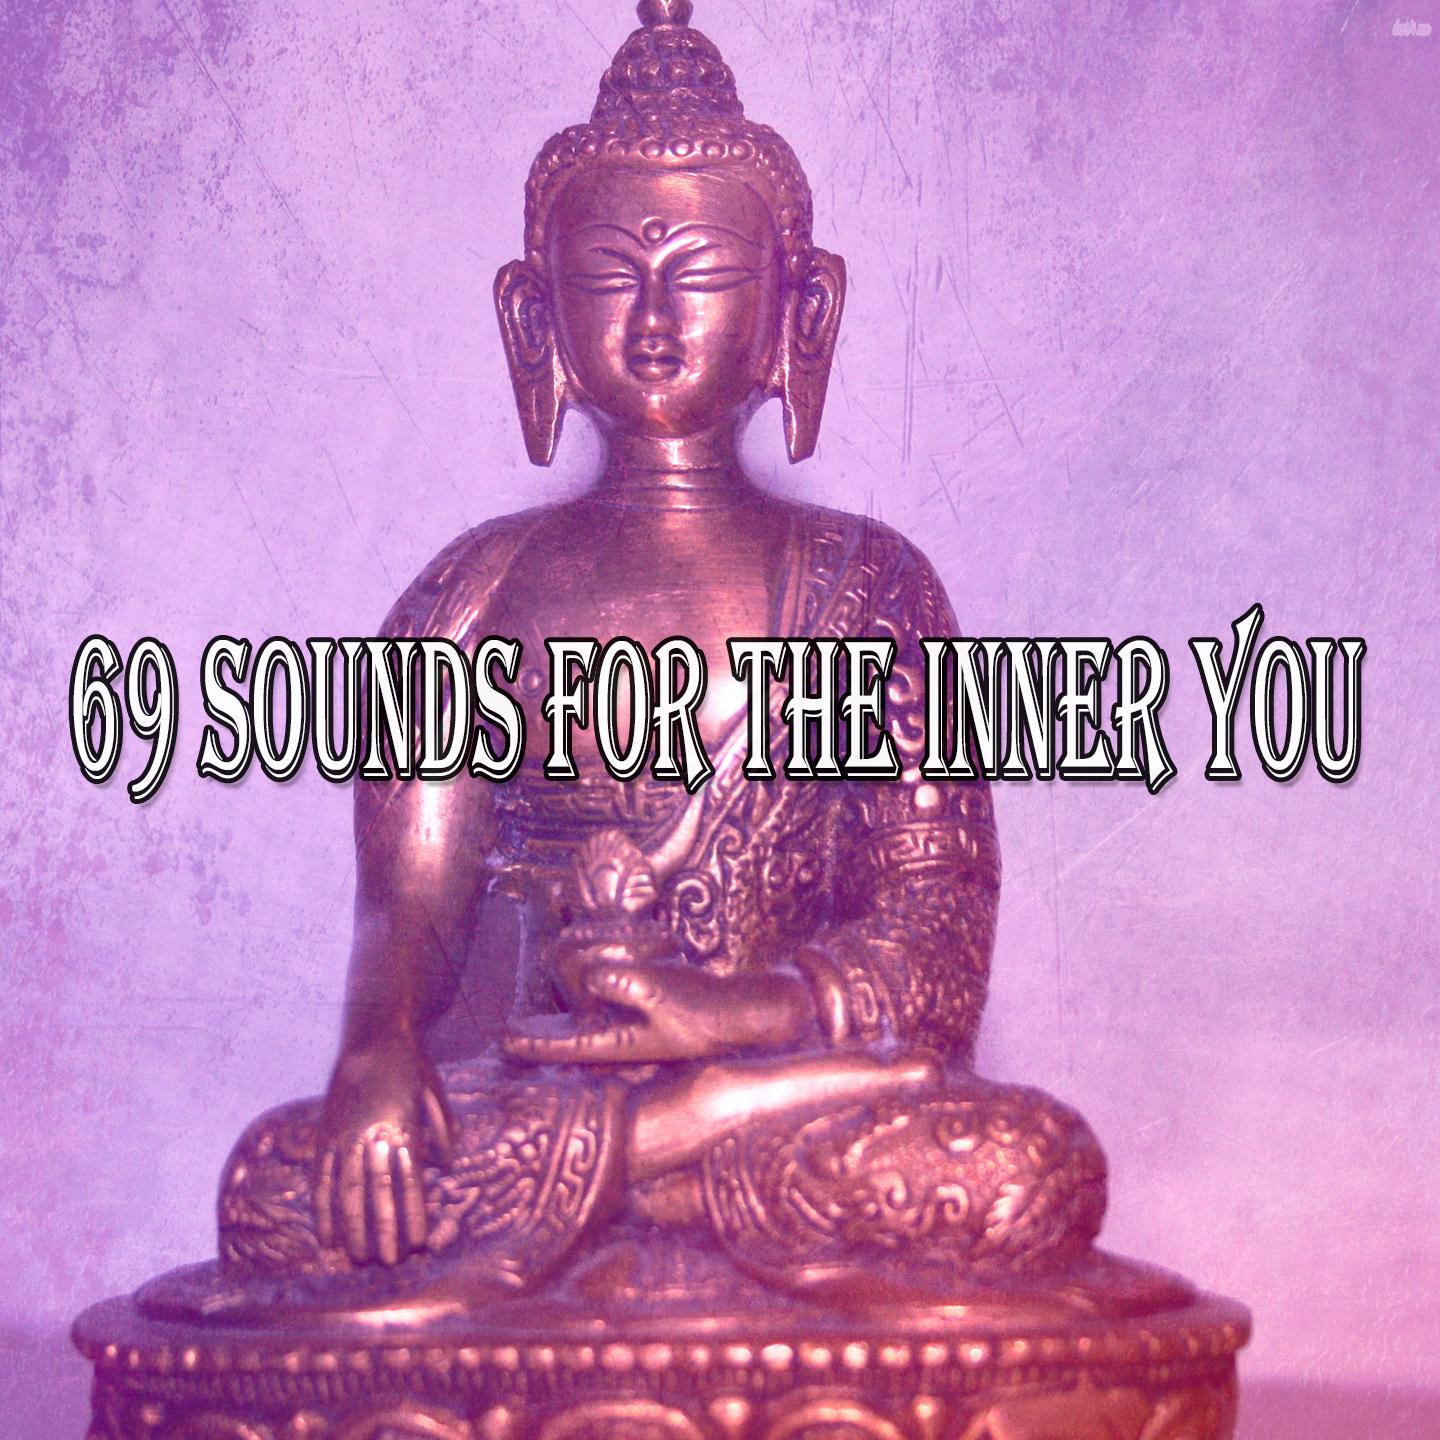 69 Sounds for the Inner You